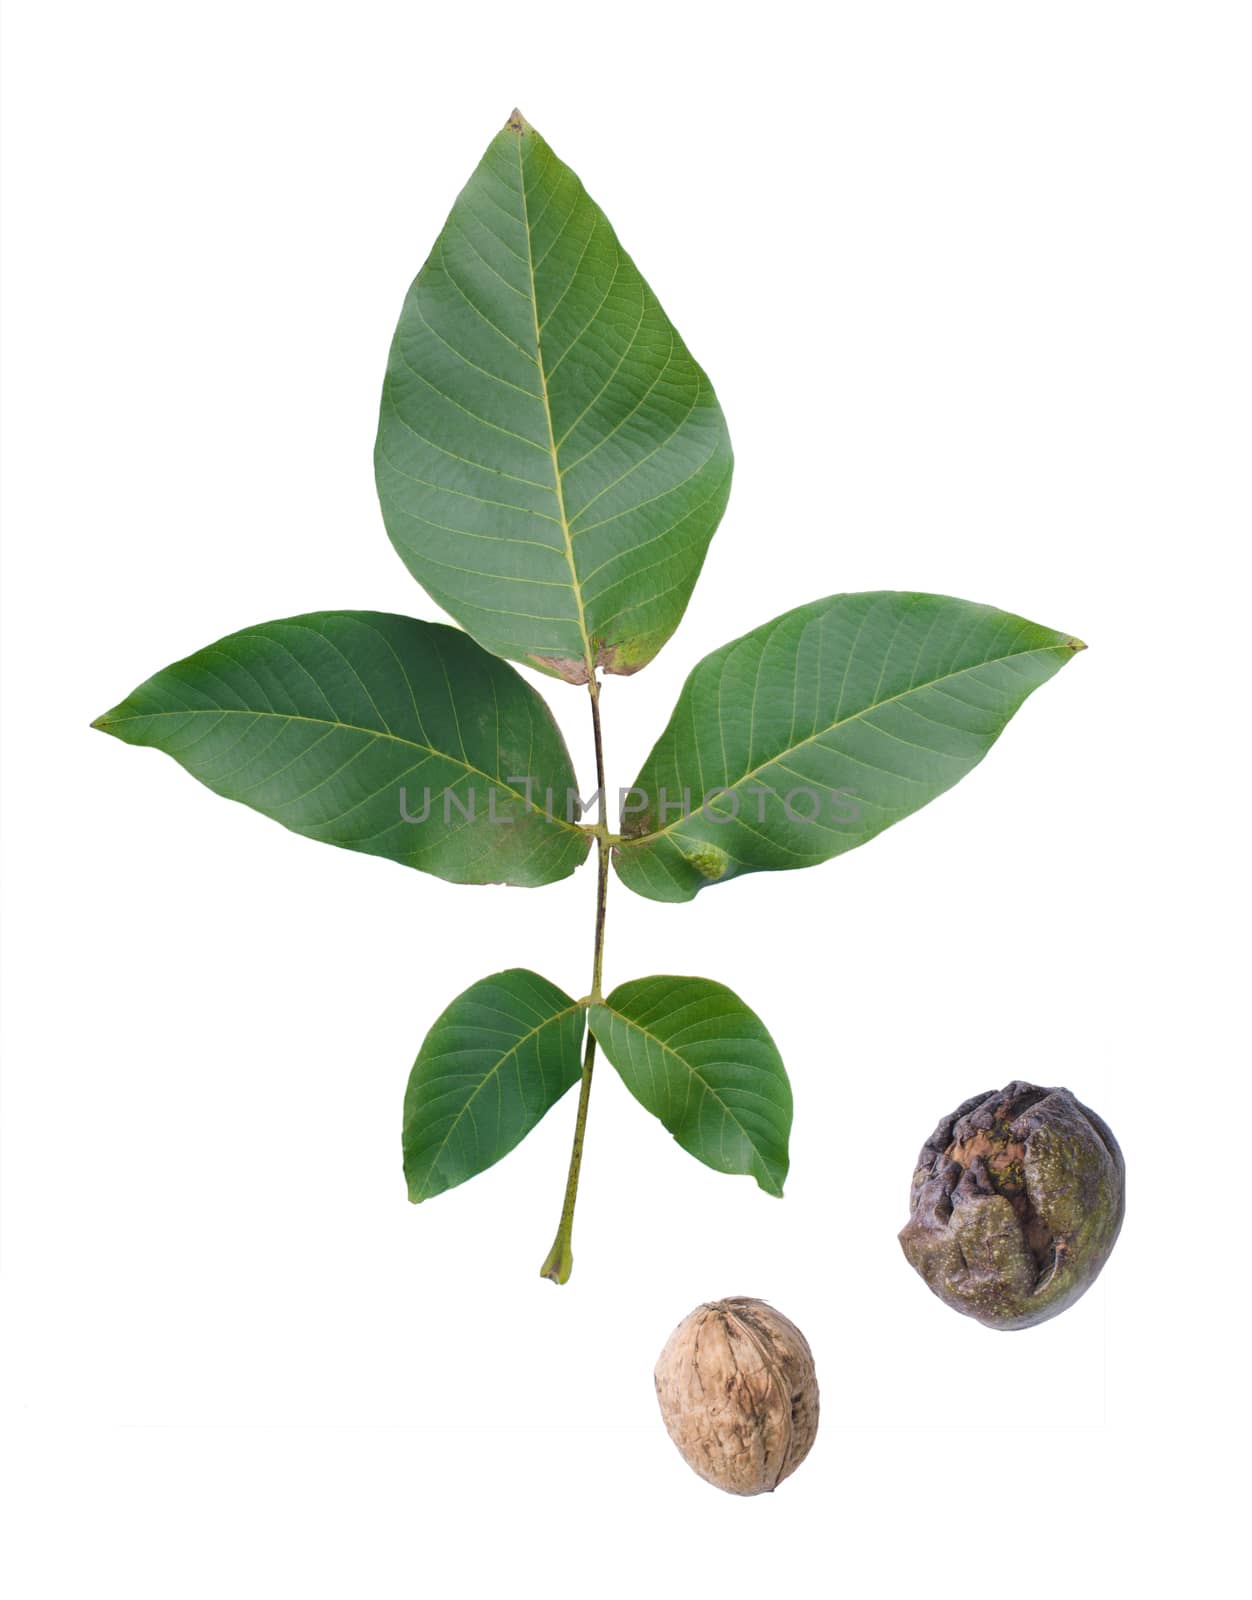 Two walnuts with leaf isolated on white background.